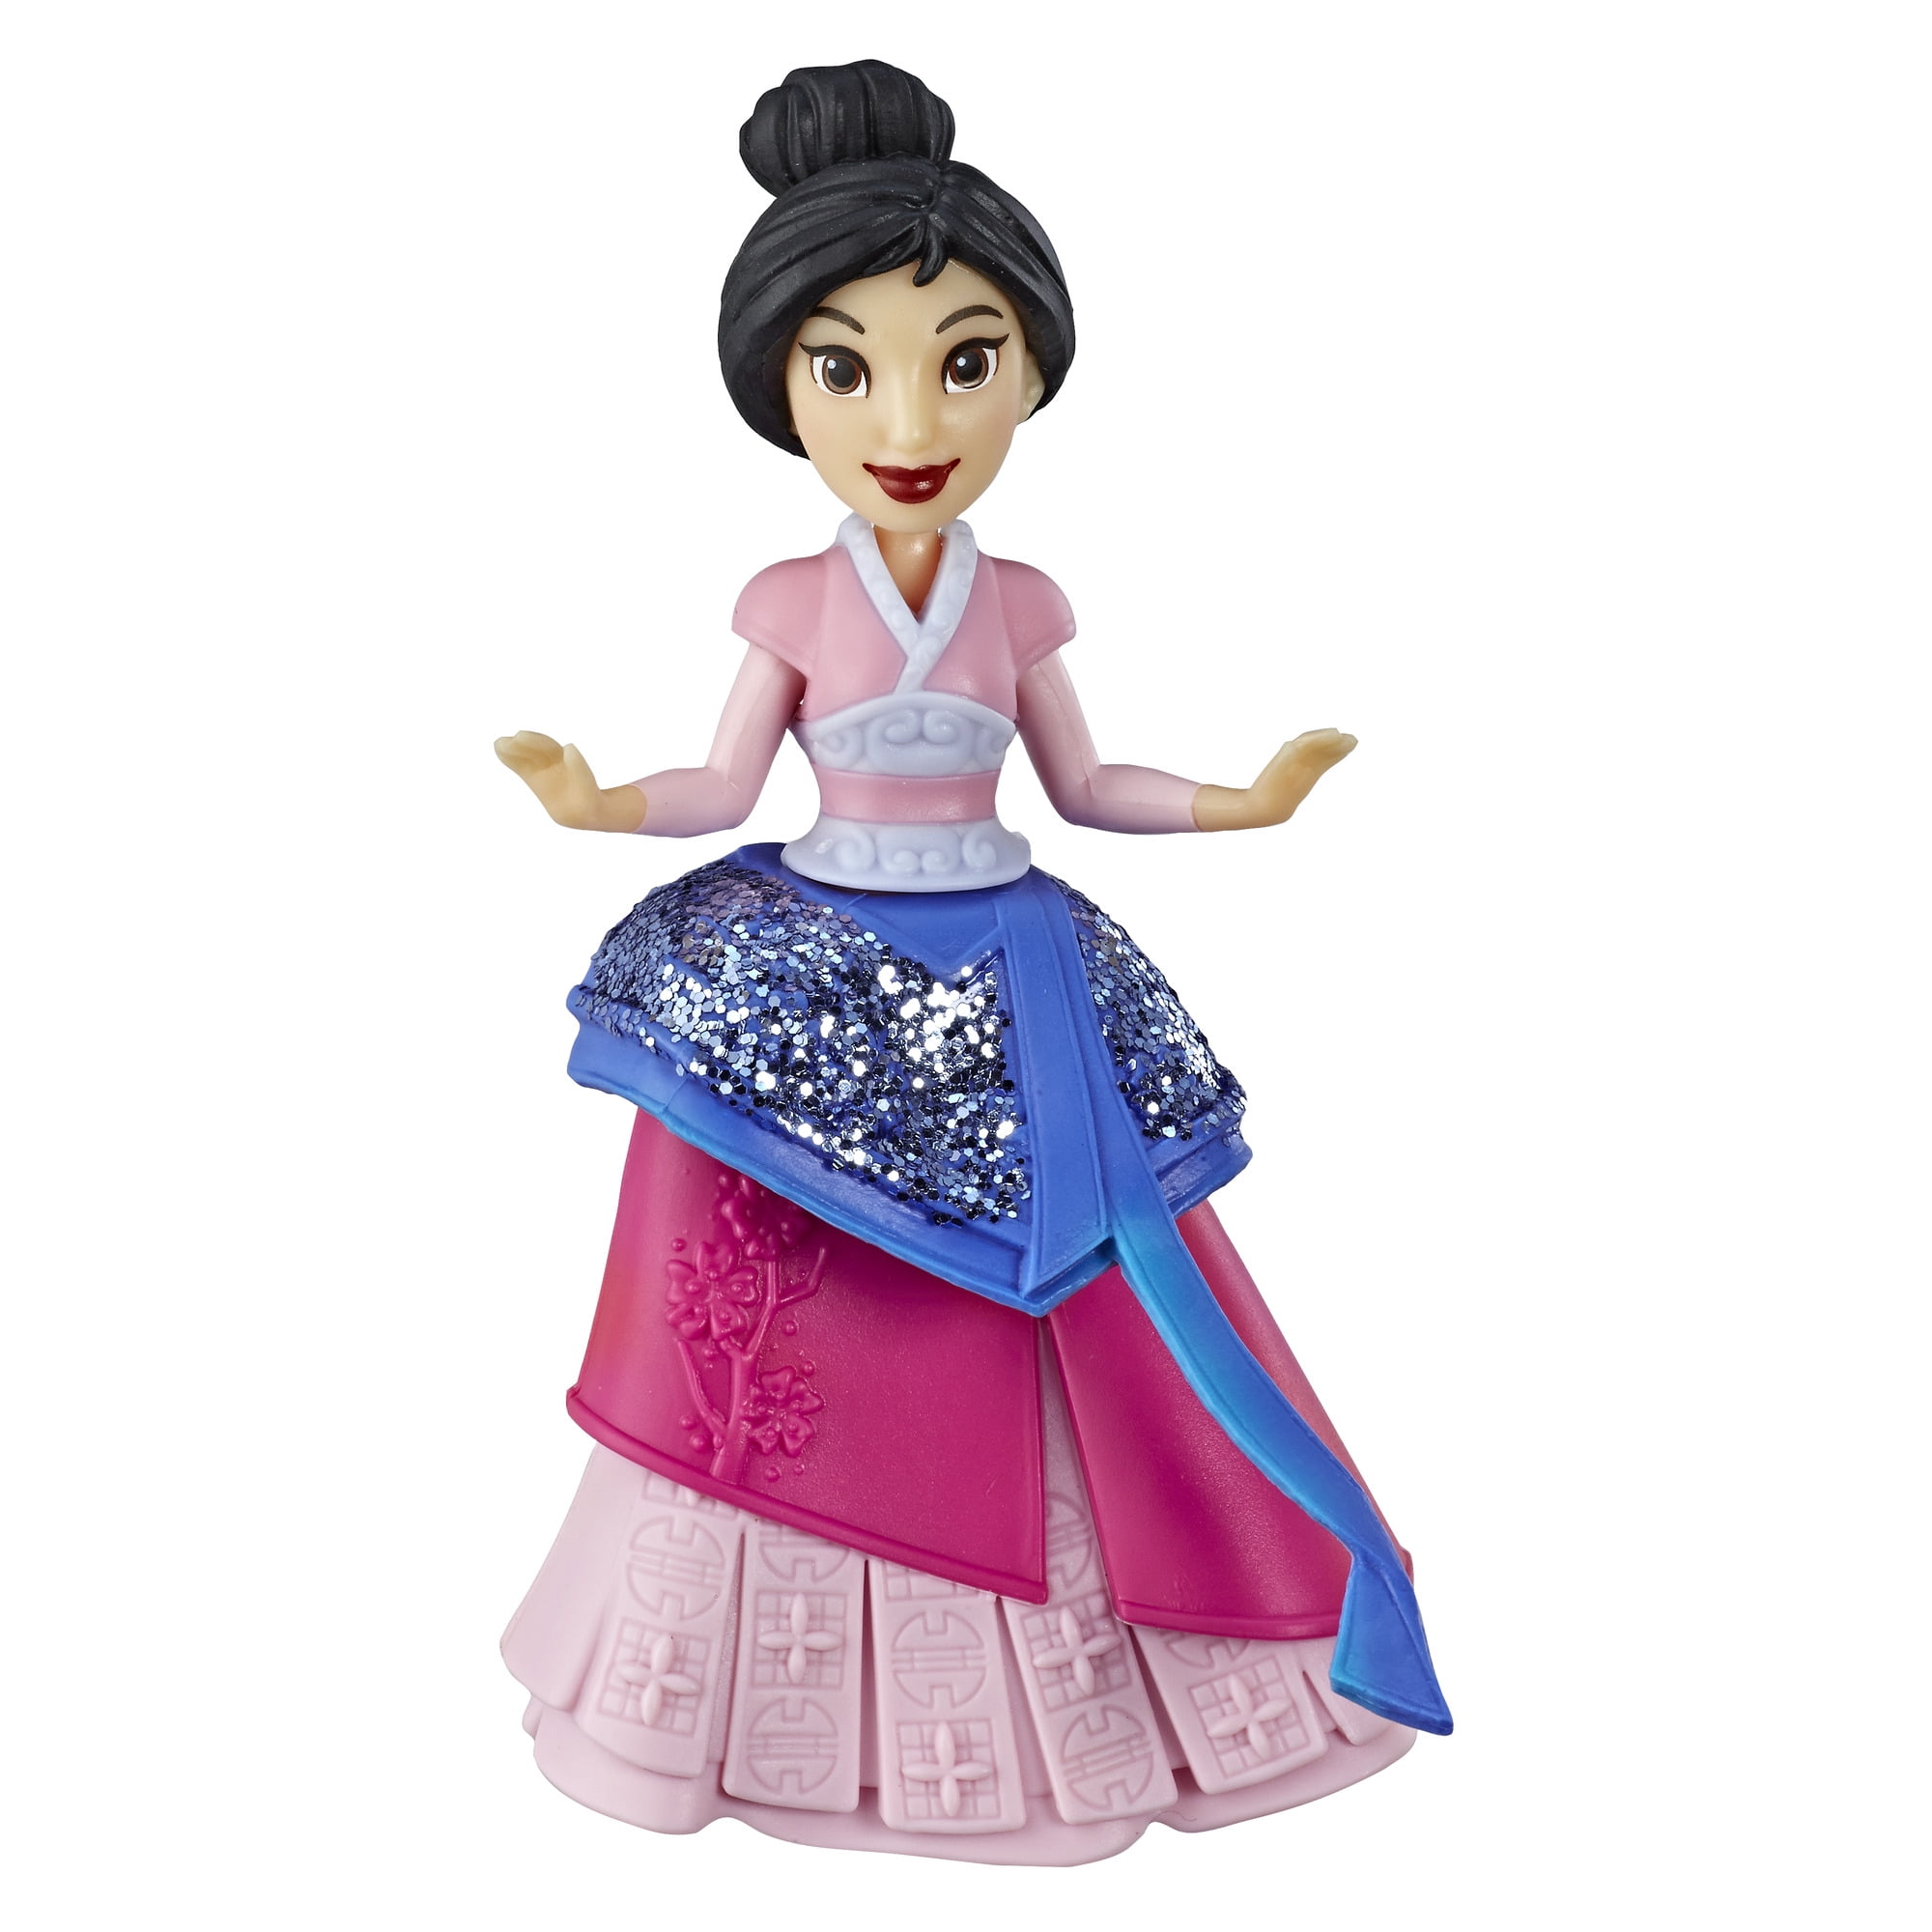 Disney Princess Mulan Collectible Doll Figure, Ages 3 and